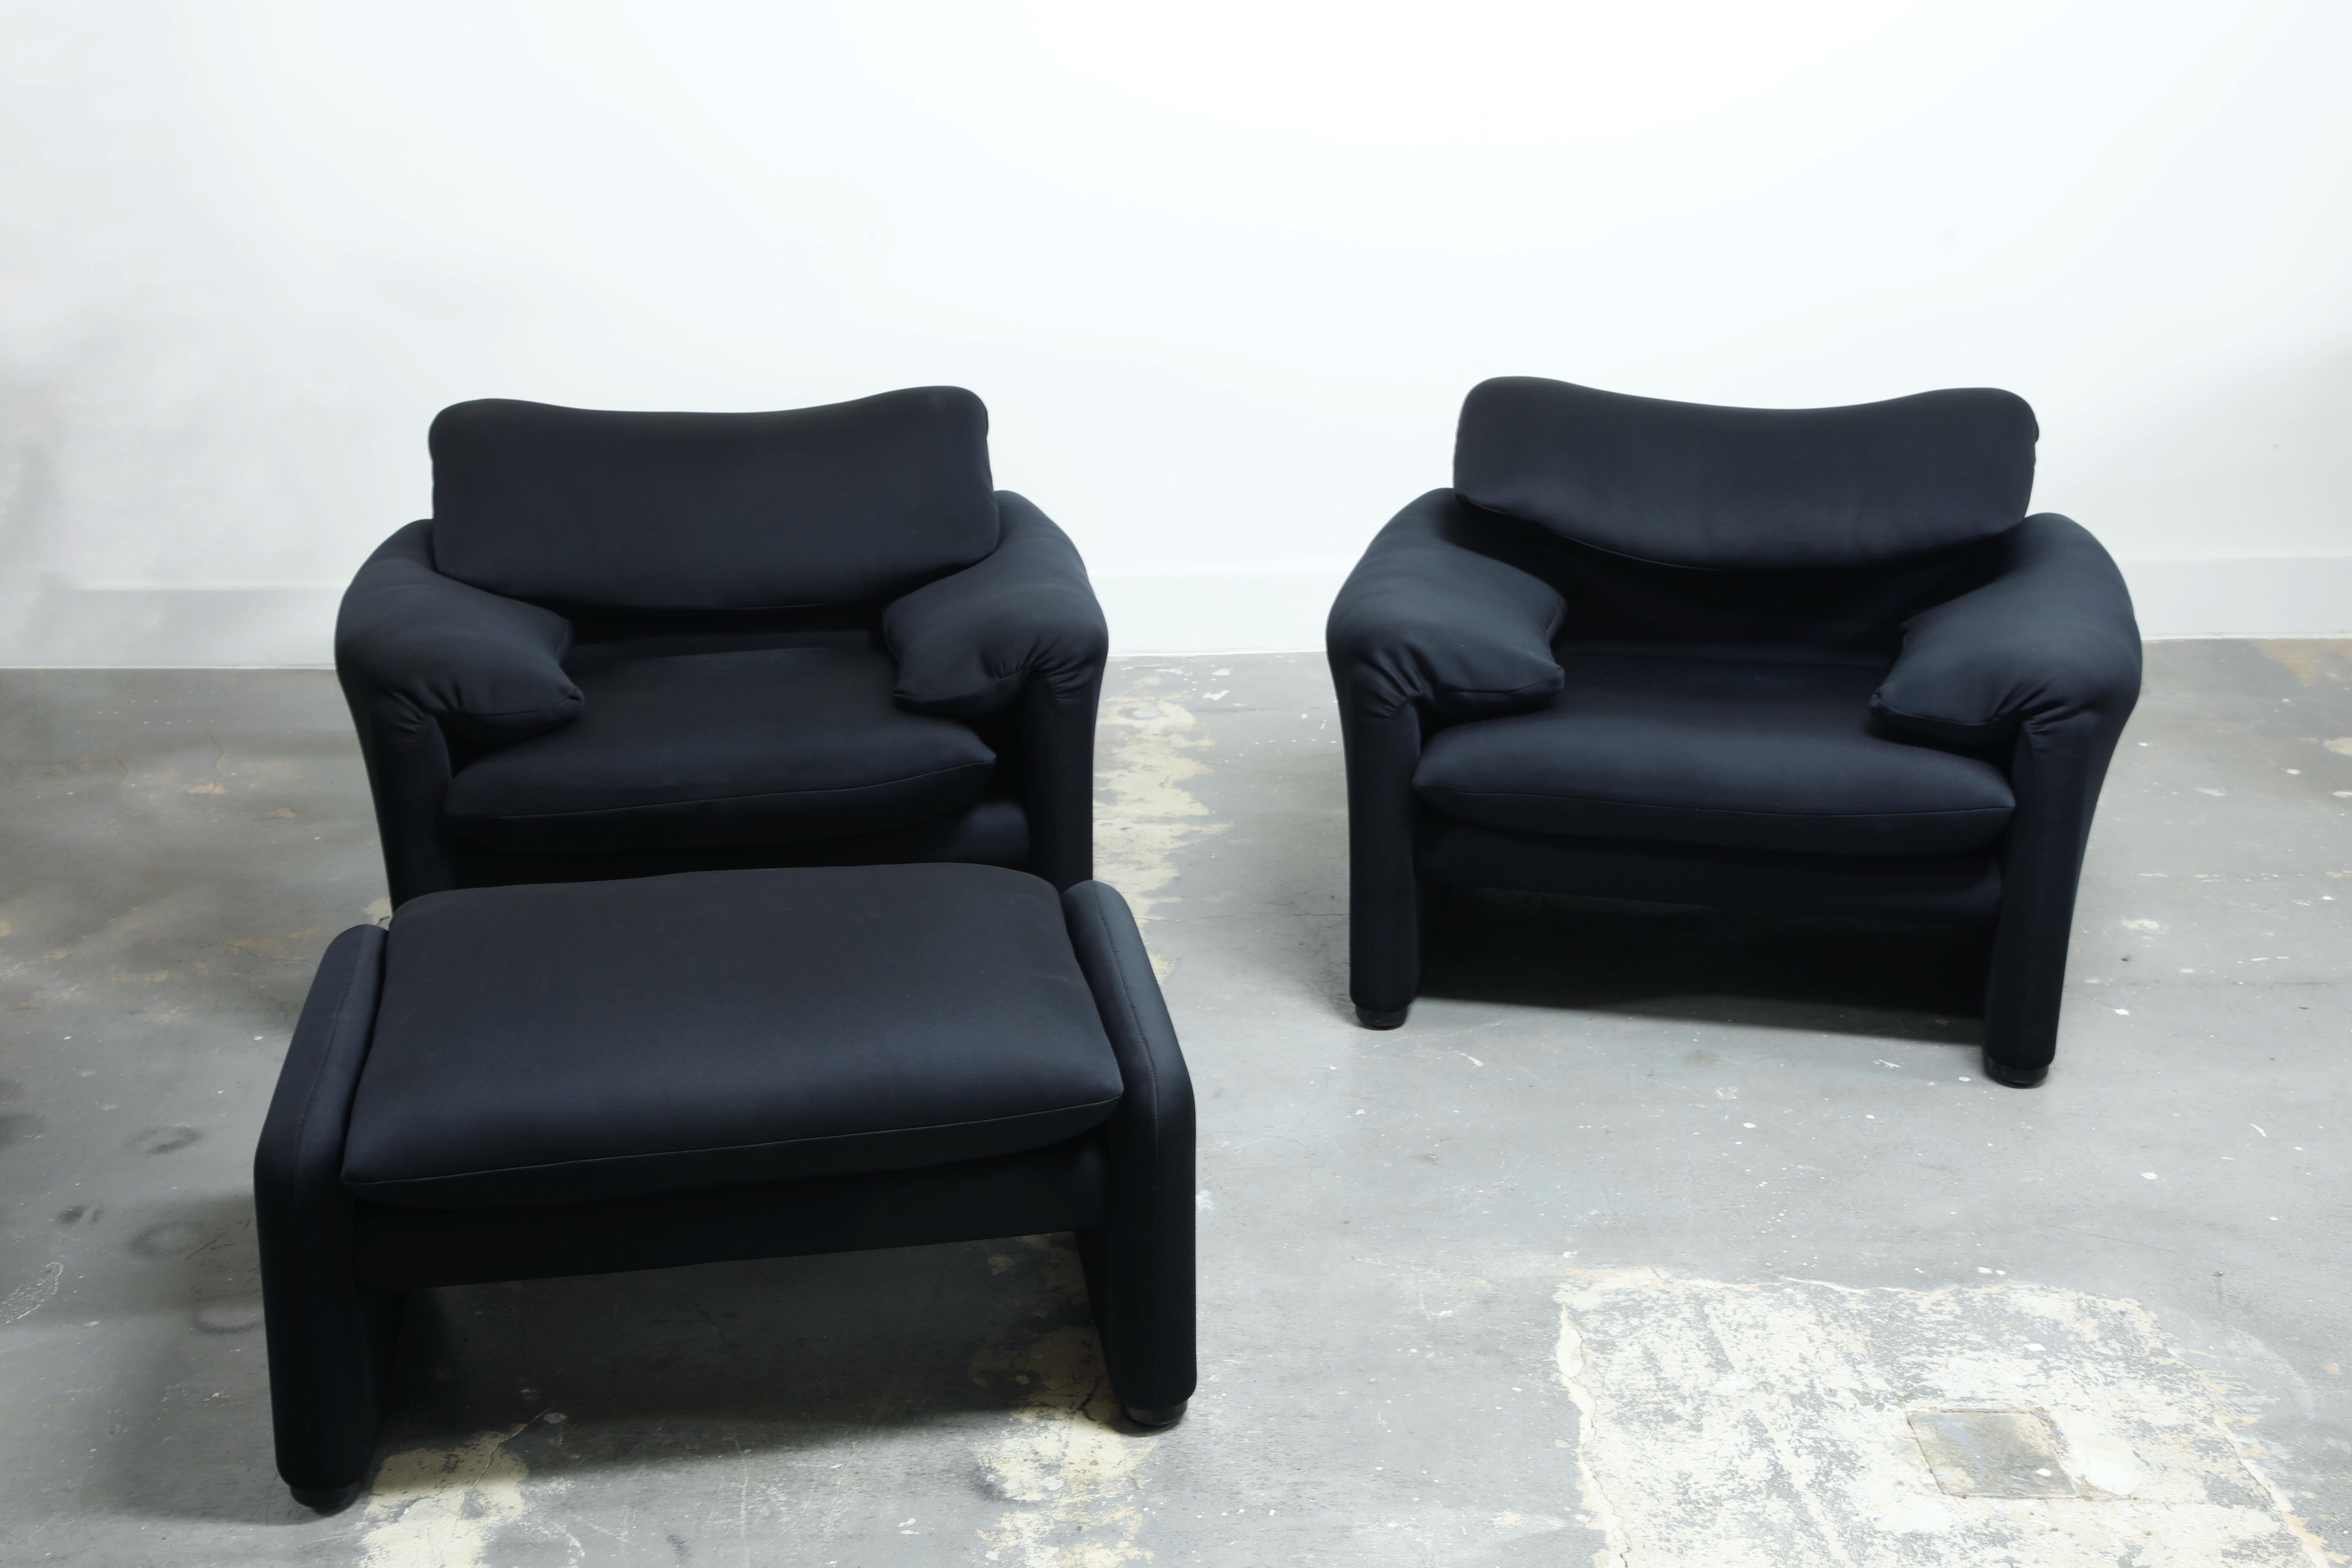 Mid-Century Modern 'Maralunga' Lounge Chairs and Ottoman by Vico Magistretti for Cassina, c. 1970